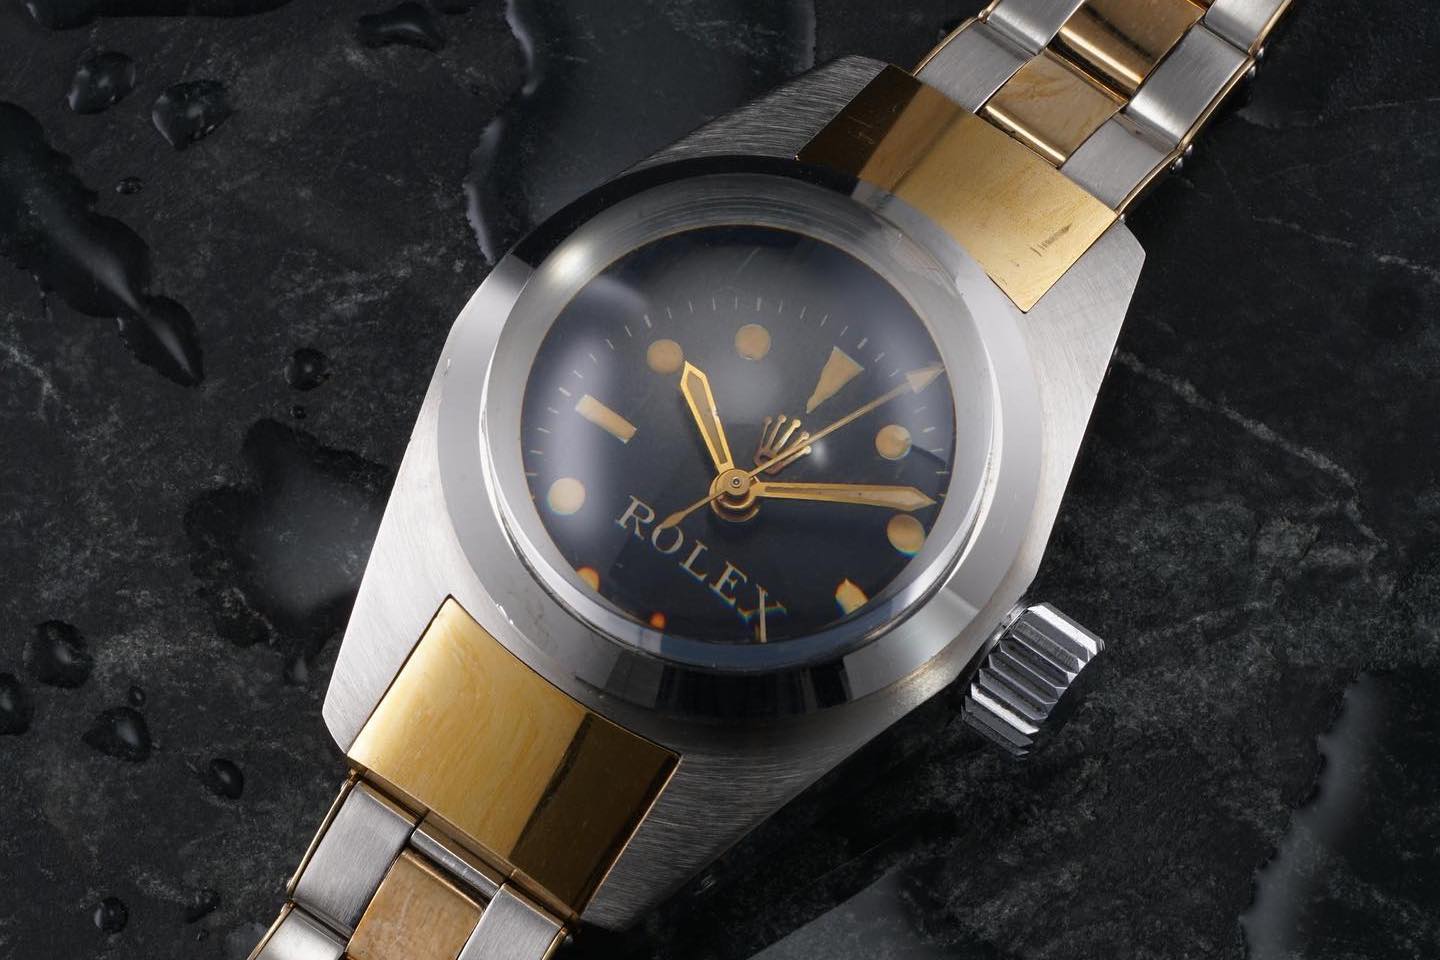 News - Ultra-Rare Rolex Deep Sea Special To be Auctioned by Phillips